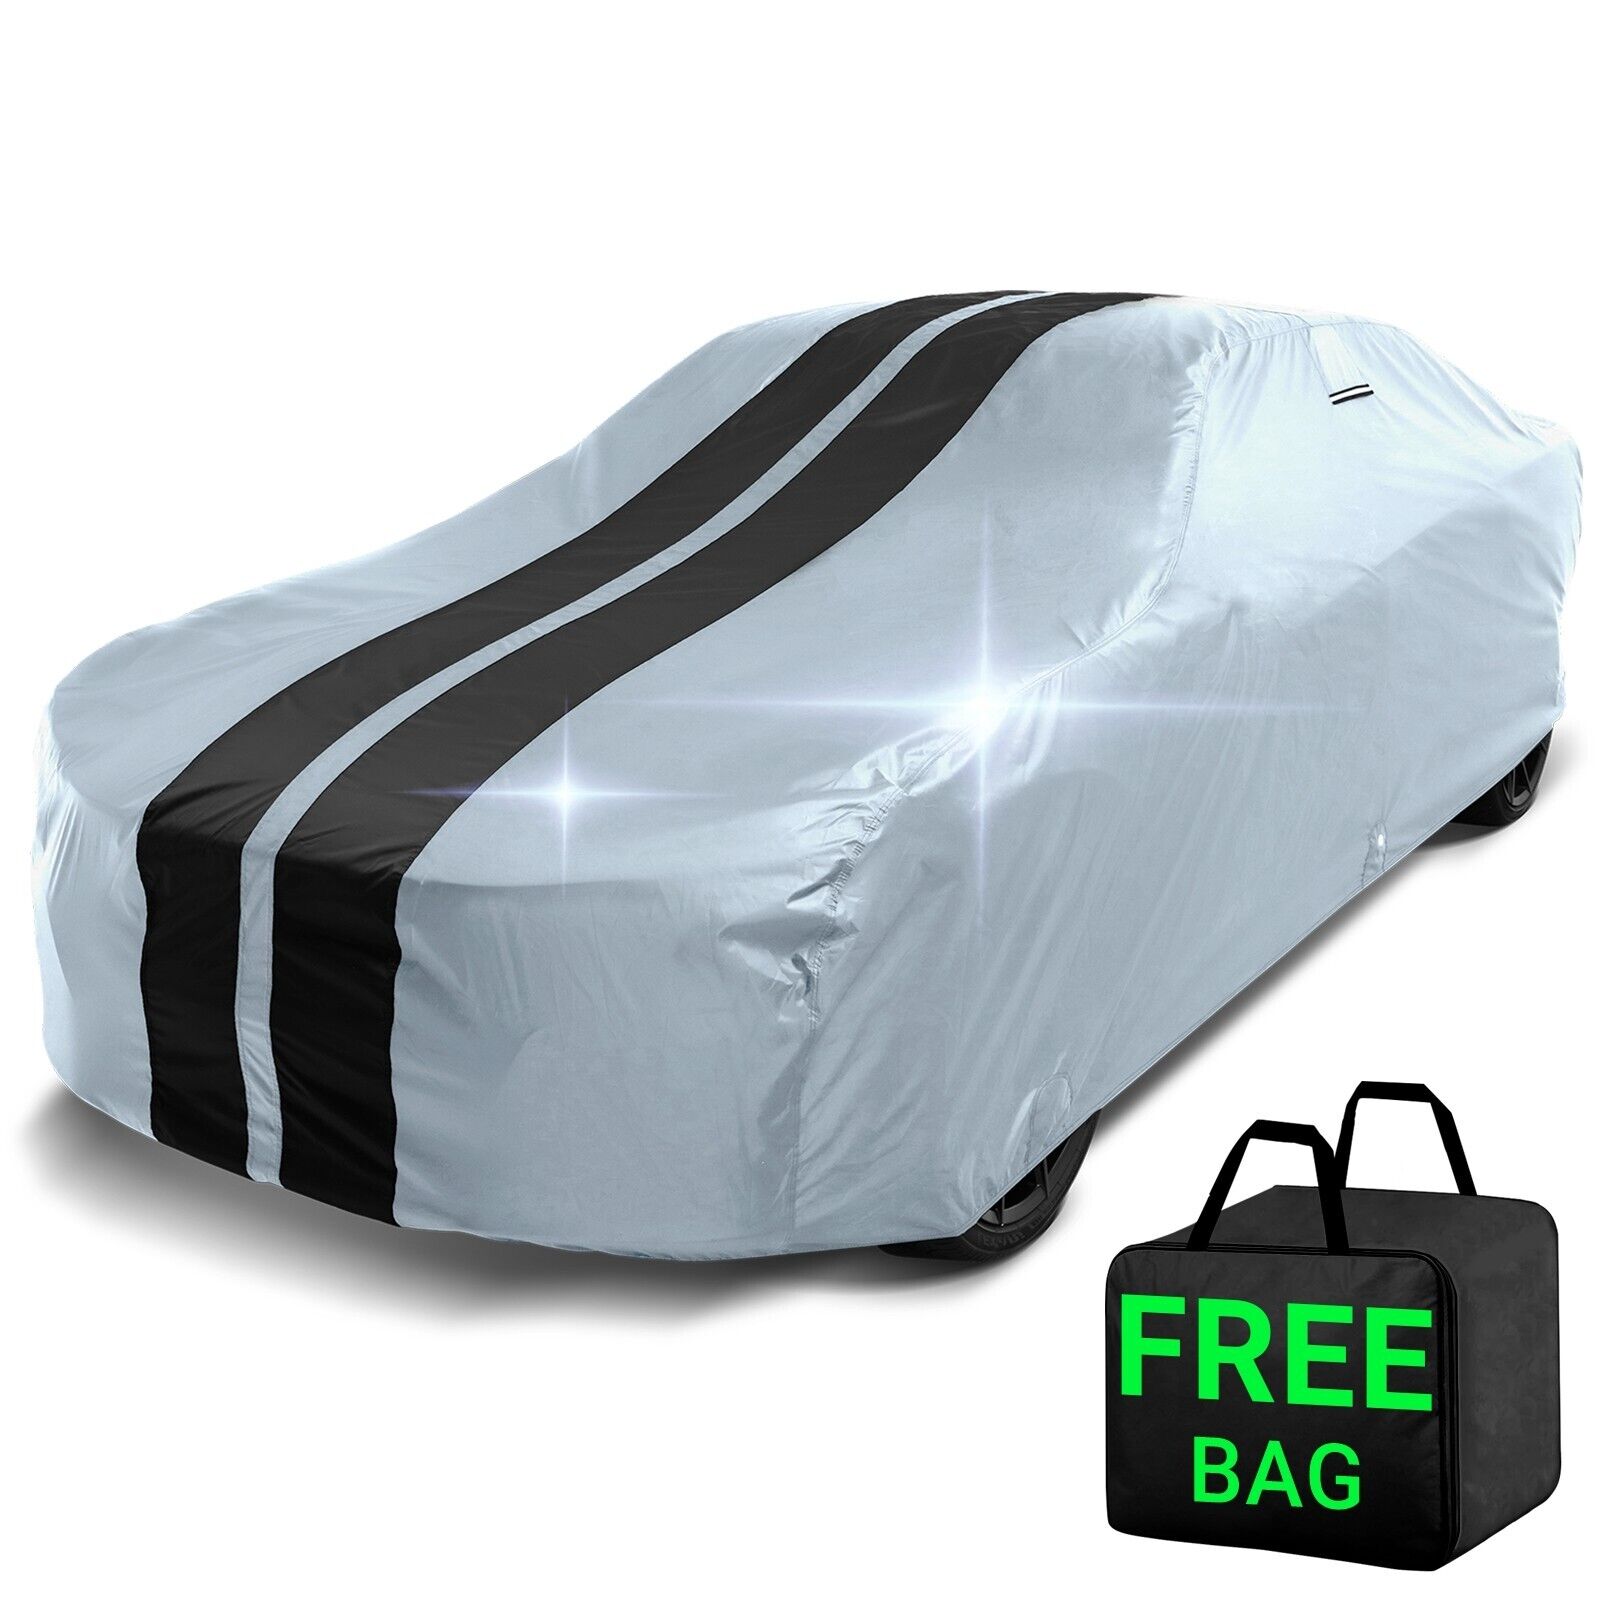 1971-1988 Opel Manta Custom Car Cover - All-Weather Waterproof Protection